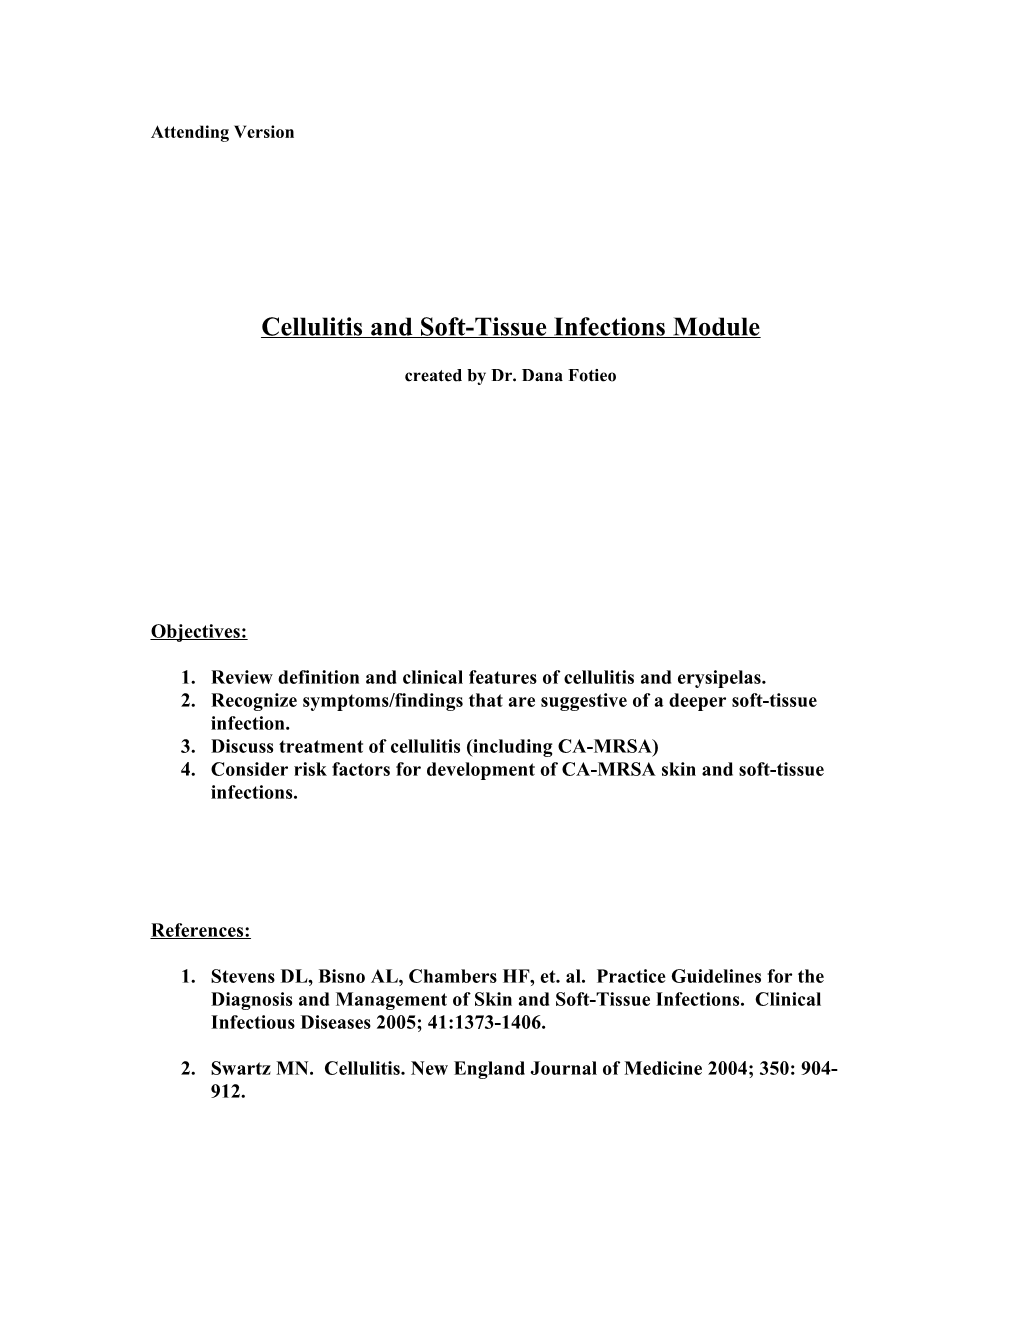 Cellulitis and Soft-Tissue Infections Module